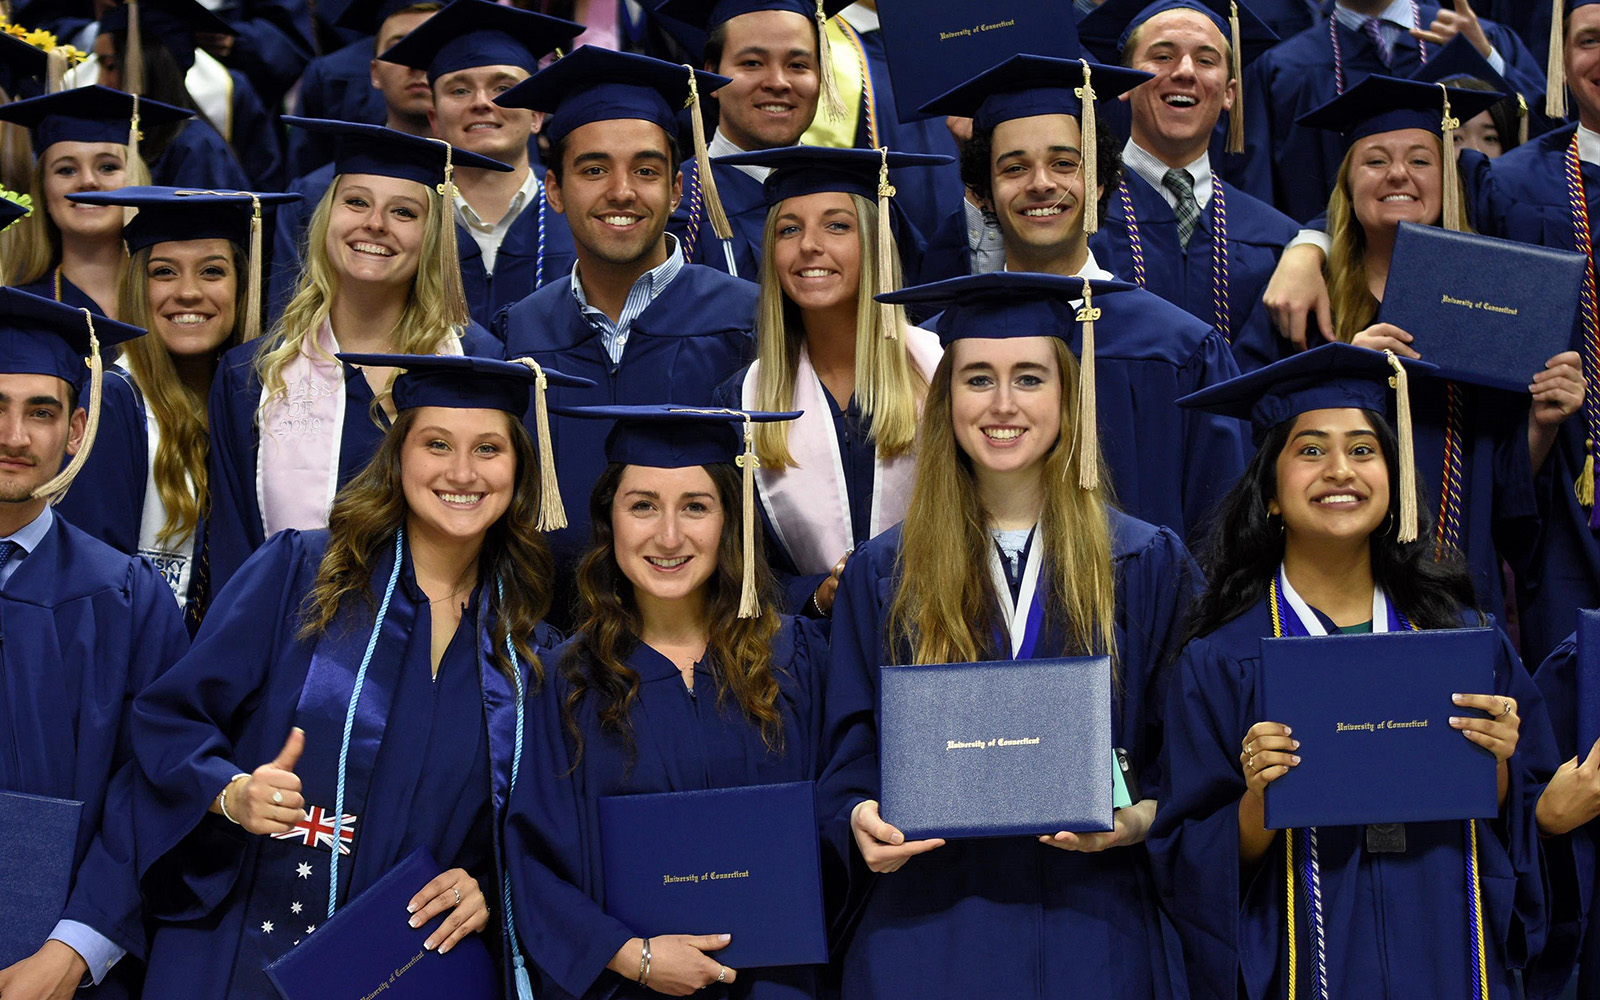 UConn School of Business Commencement 2019 (UConn School of Business)